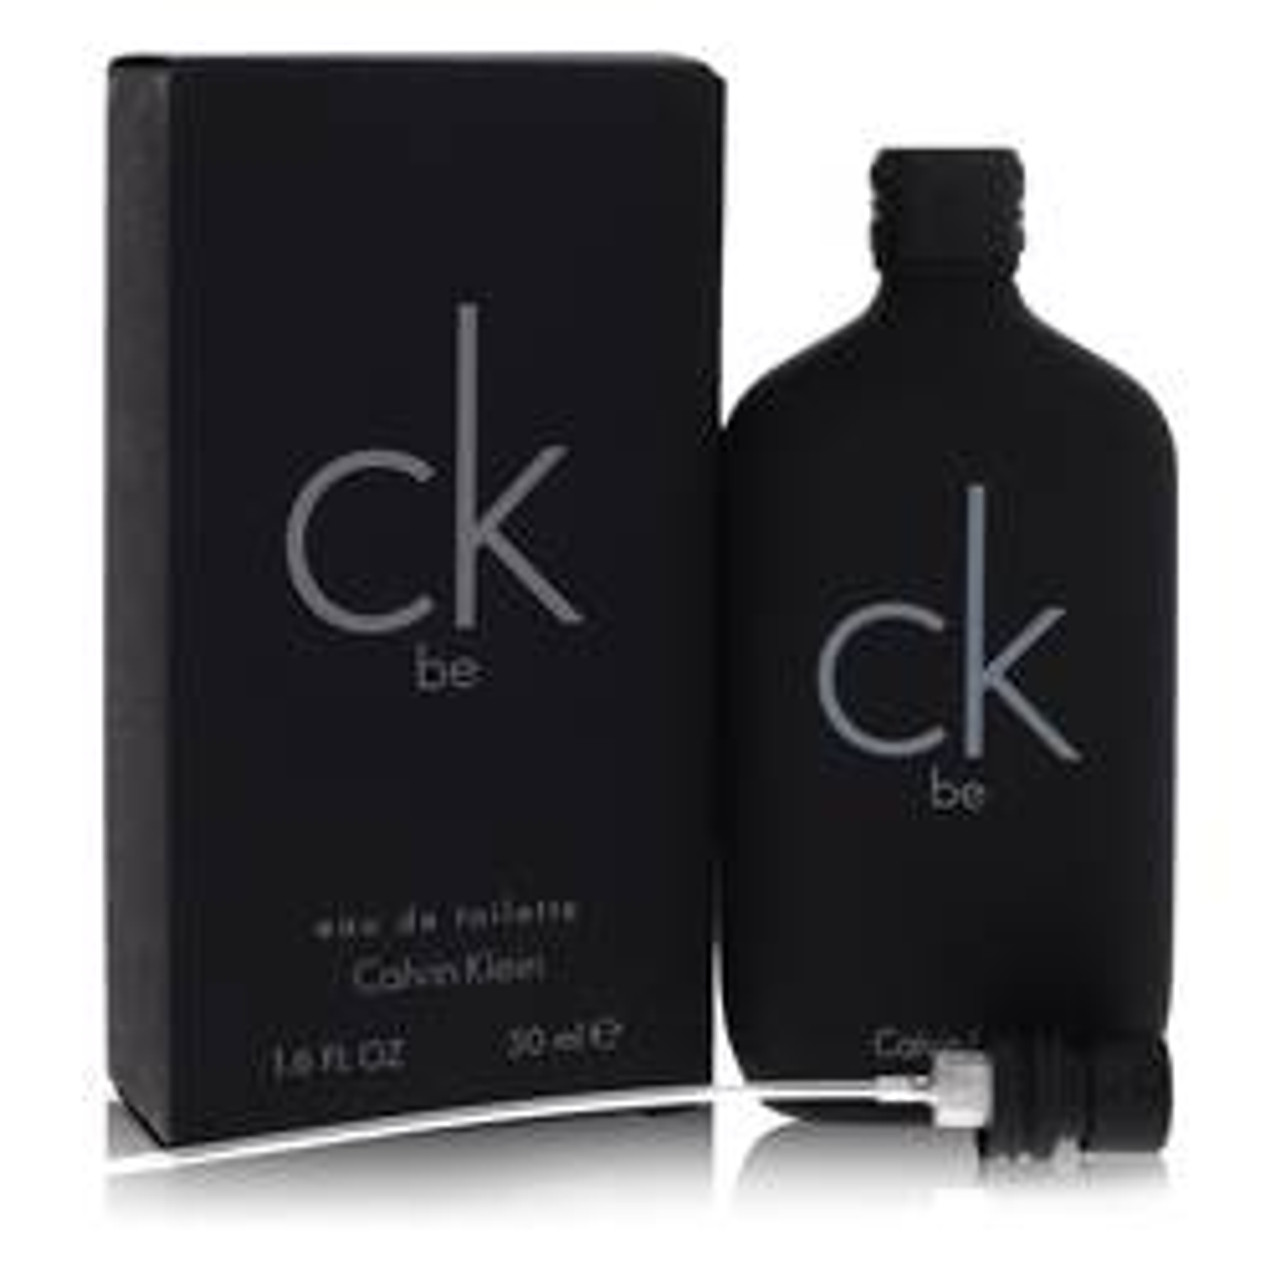 Ck Be Cologne By Calvin Klein Eau De Toilette Spray (Unisex) 1.7 oz for Men - [From 50.33 - Choose pk Qty ] - *Ships from Miami